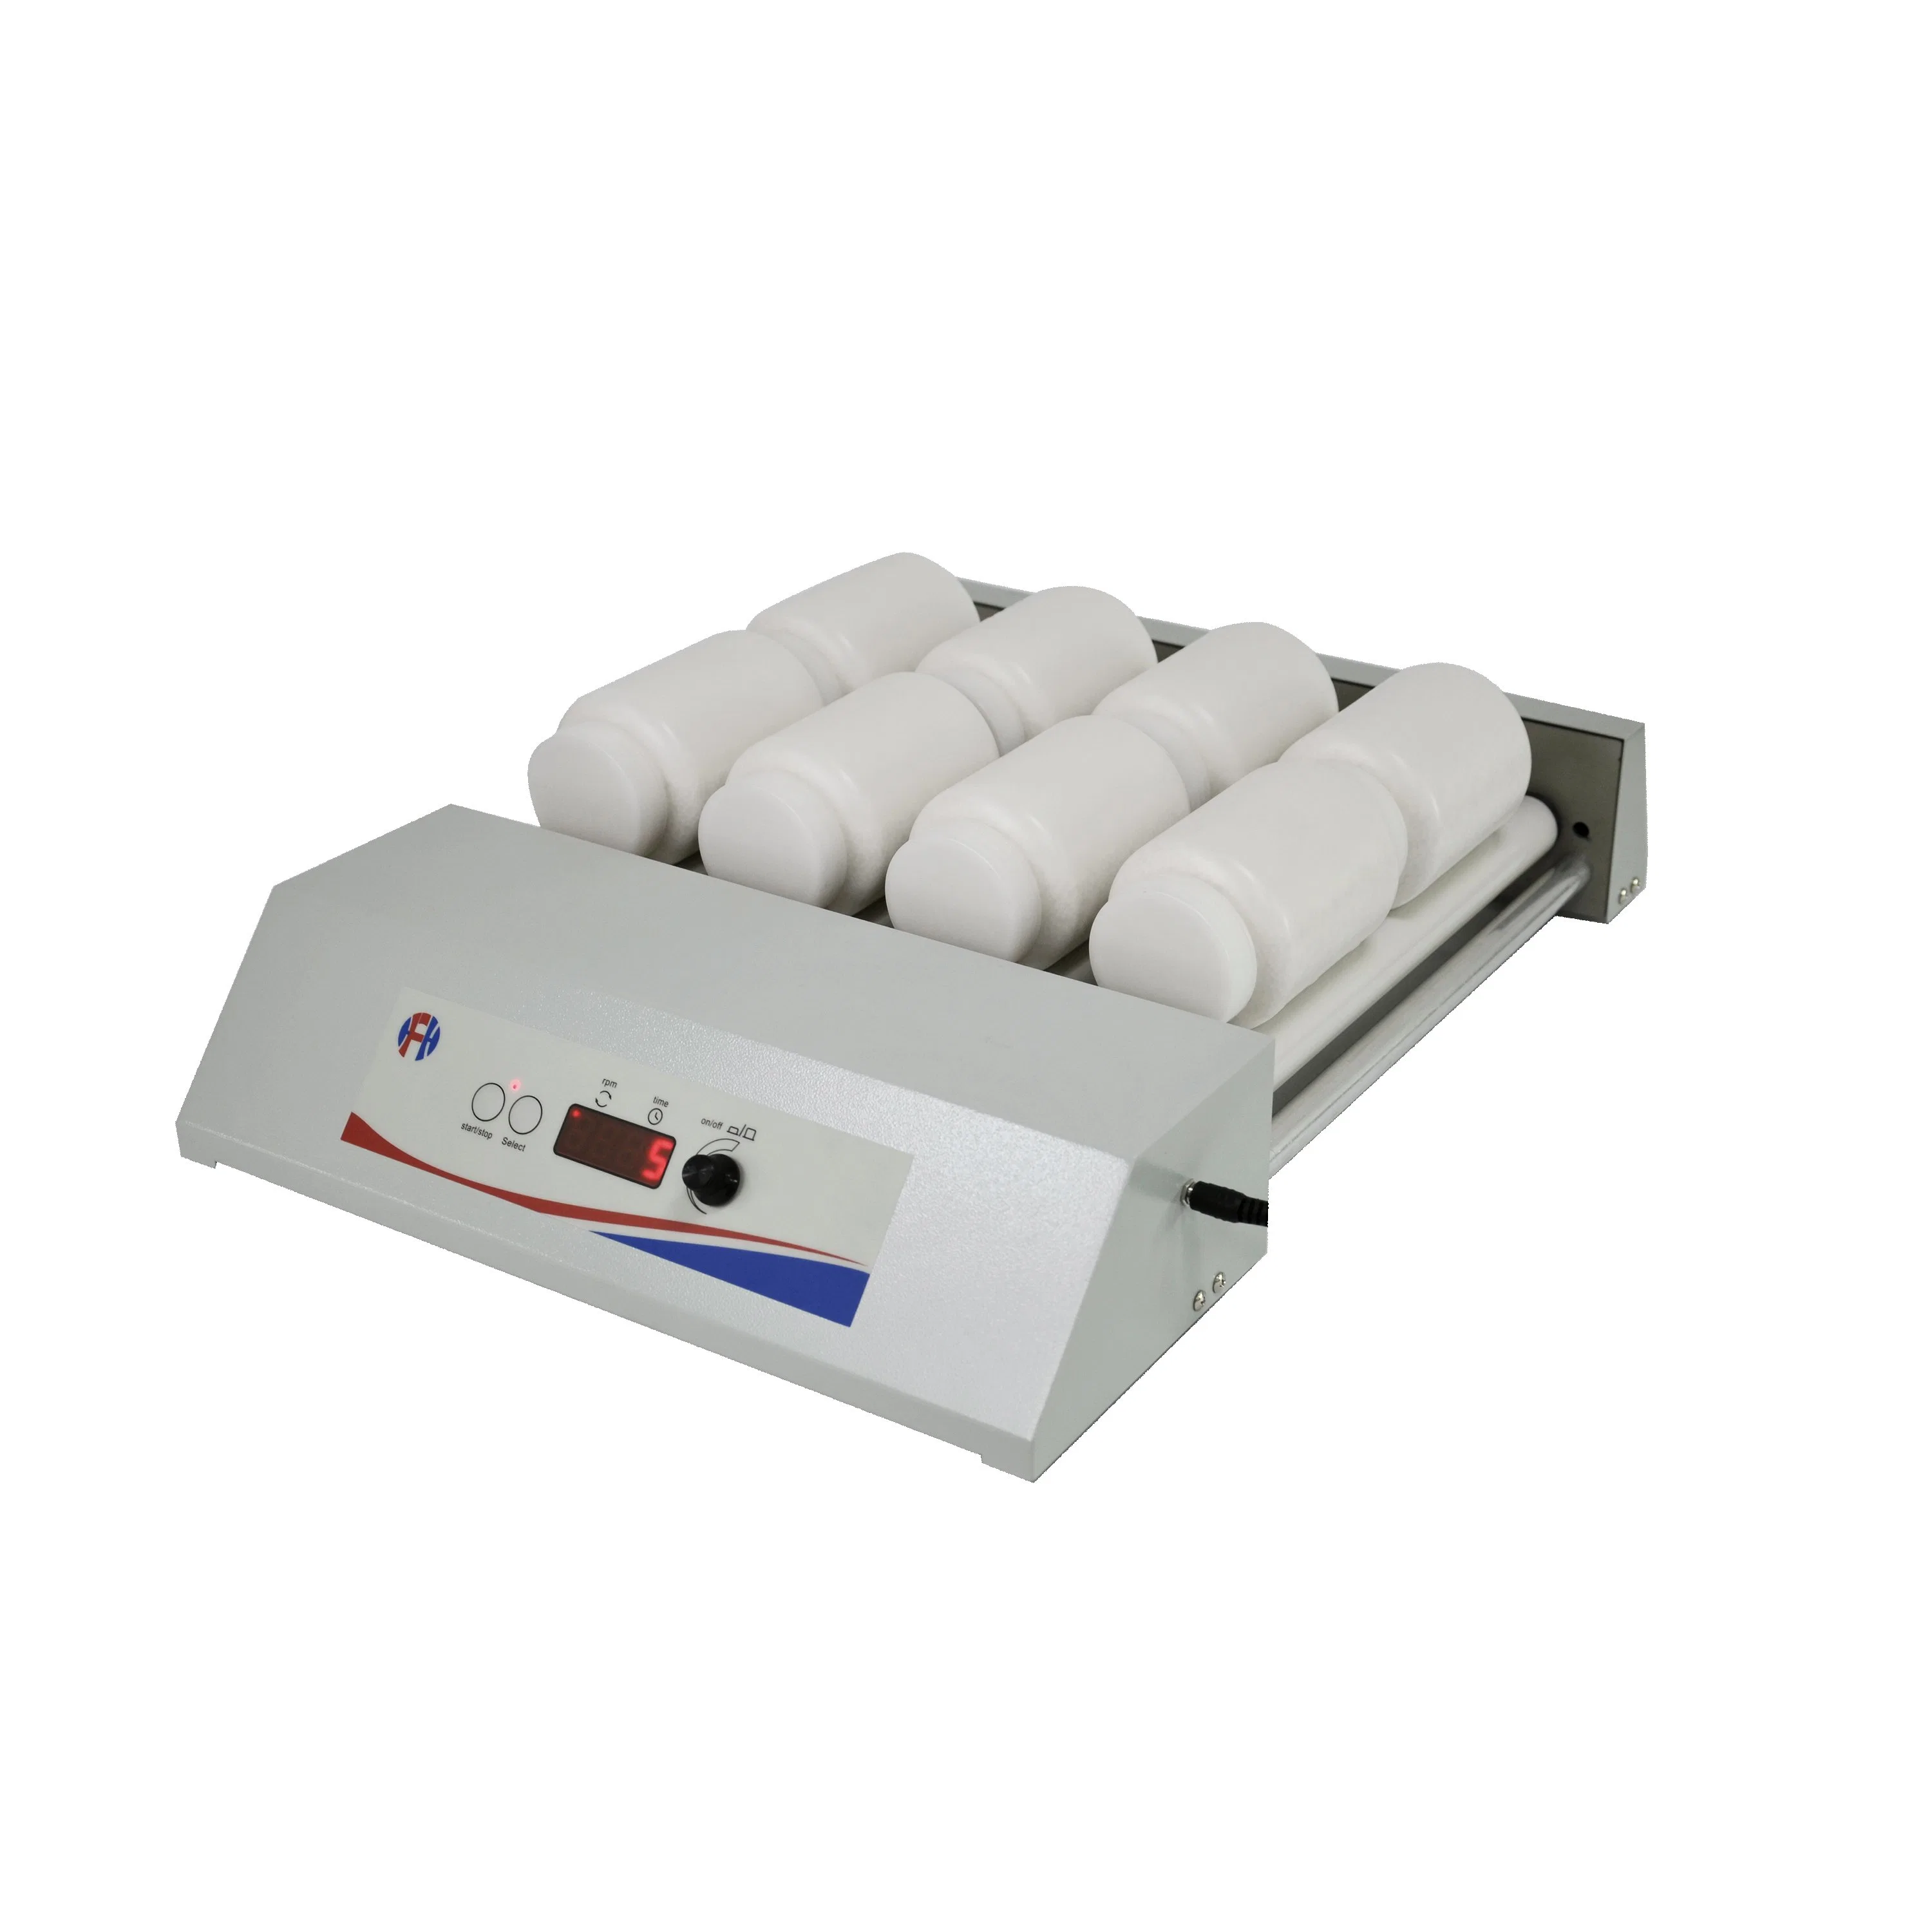 Laboratory or Hospital Lab Instrument Test Tube Blood Rollers Mixer for Lab